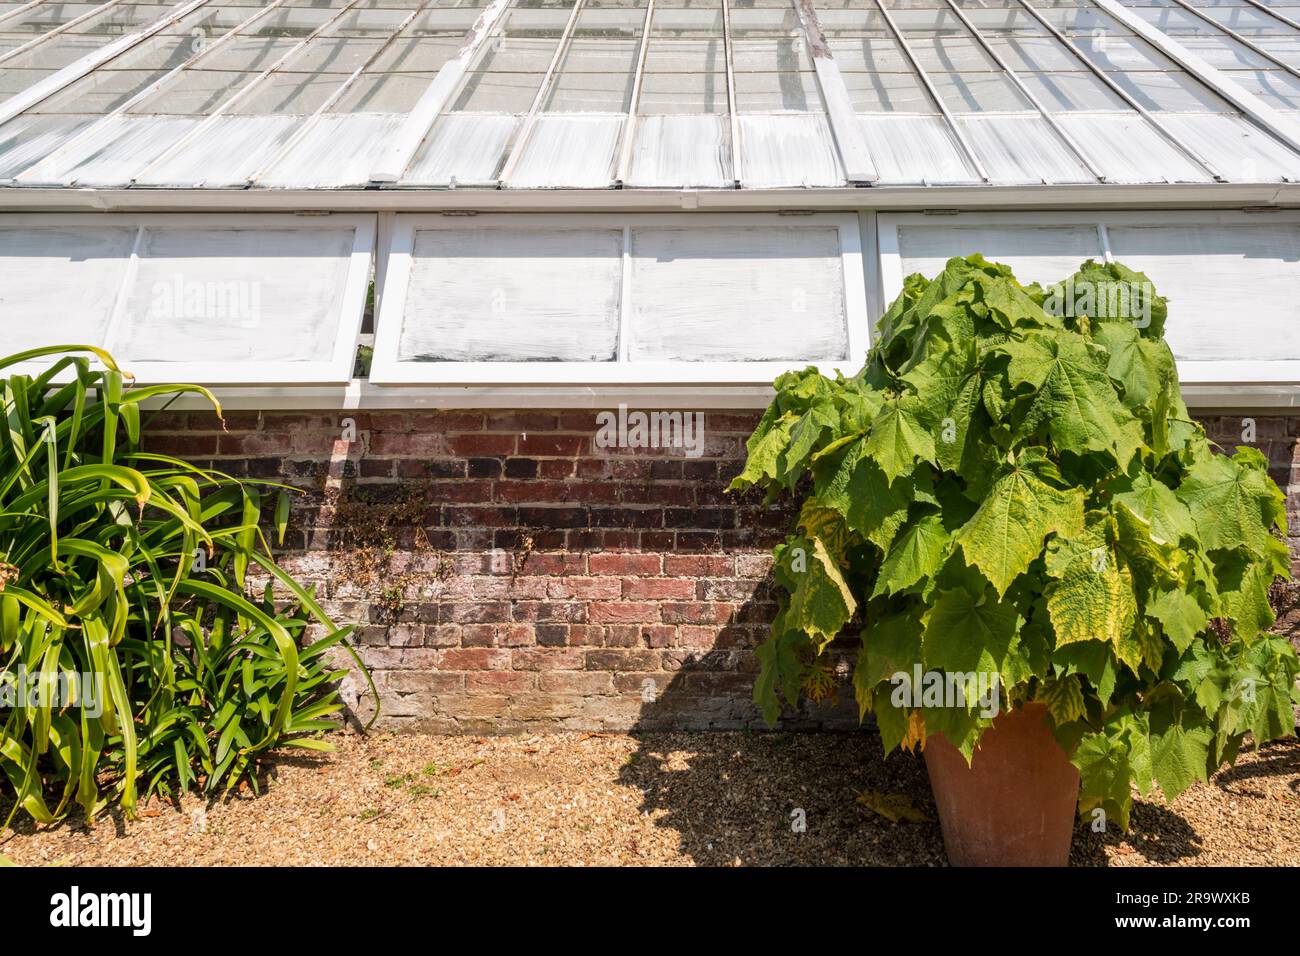 Greenhouse with glass whitewashed to reduce heat in the summer. Stock Photo